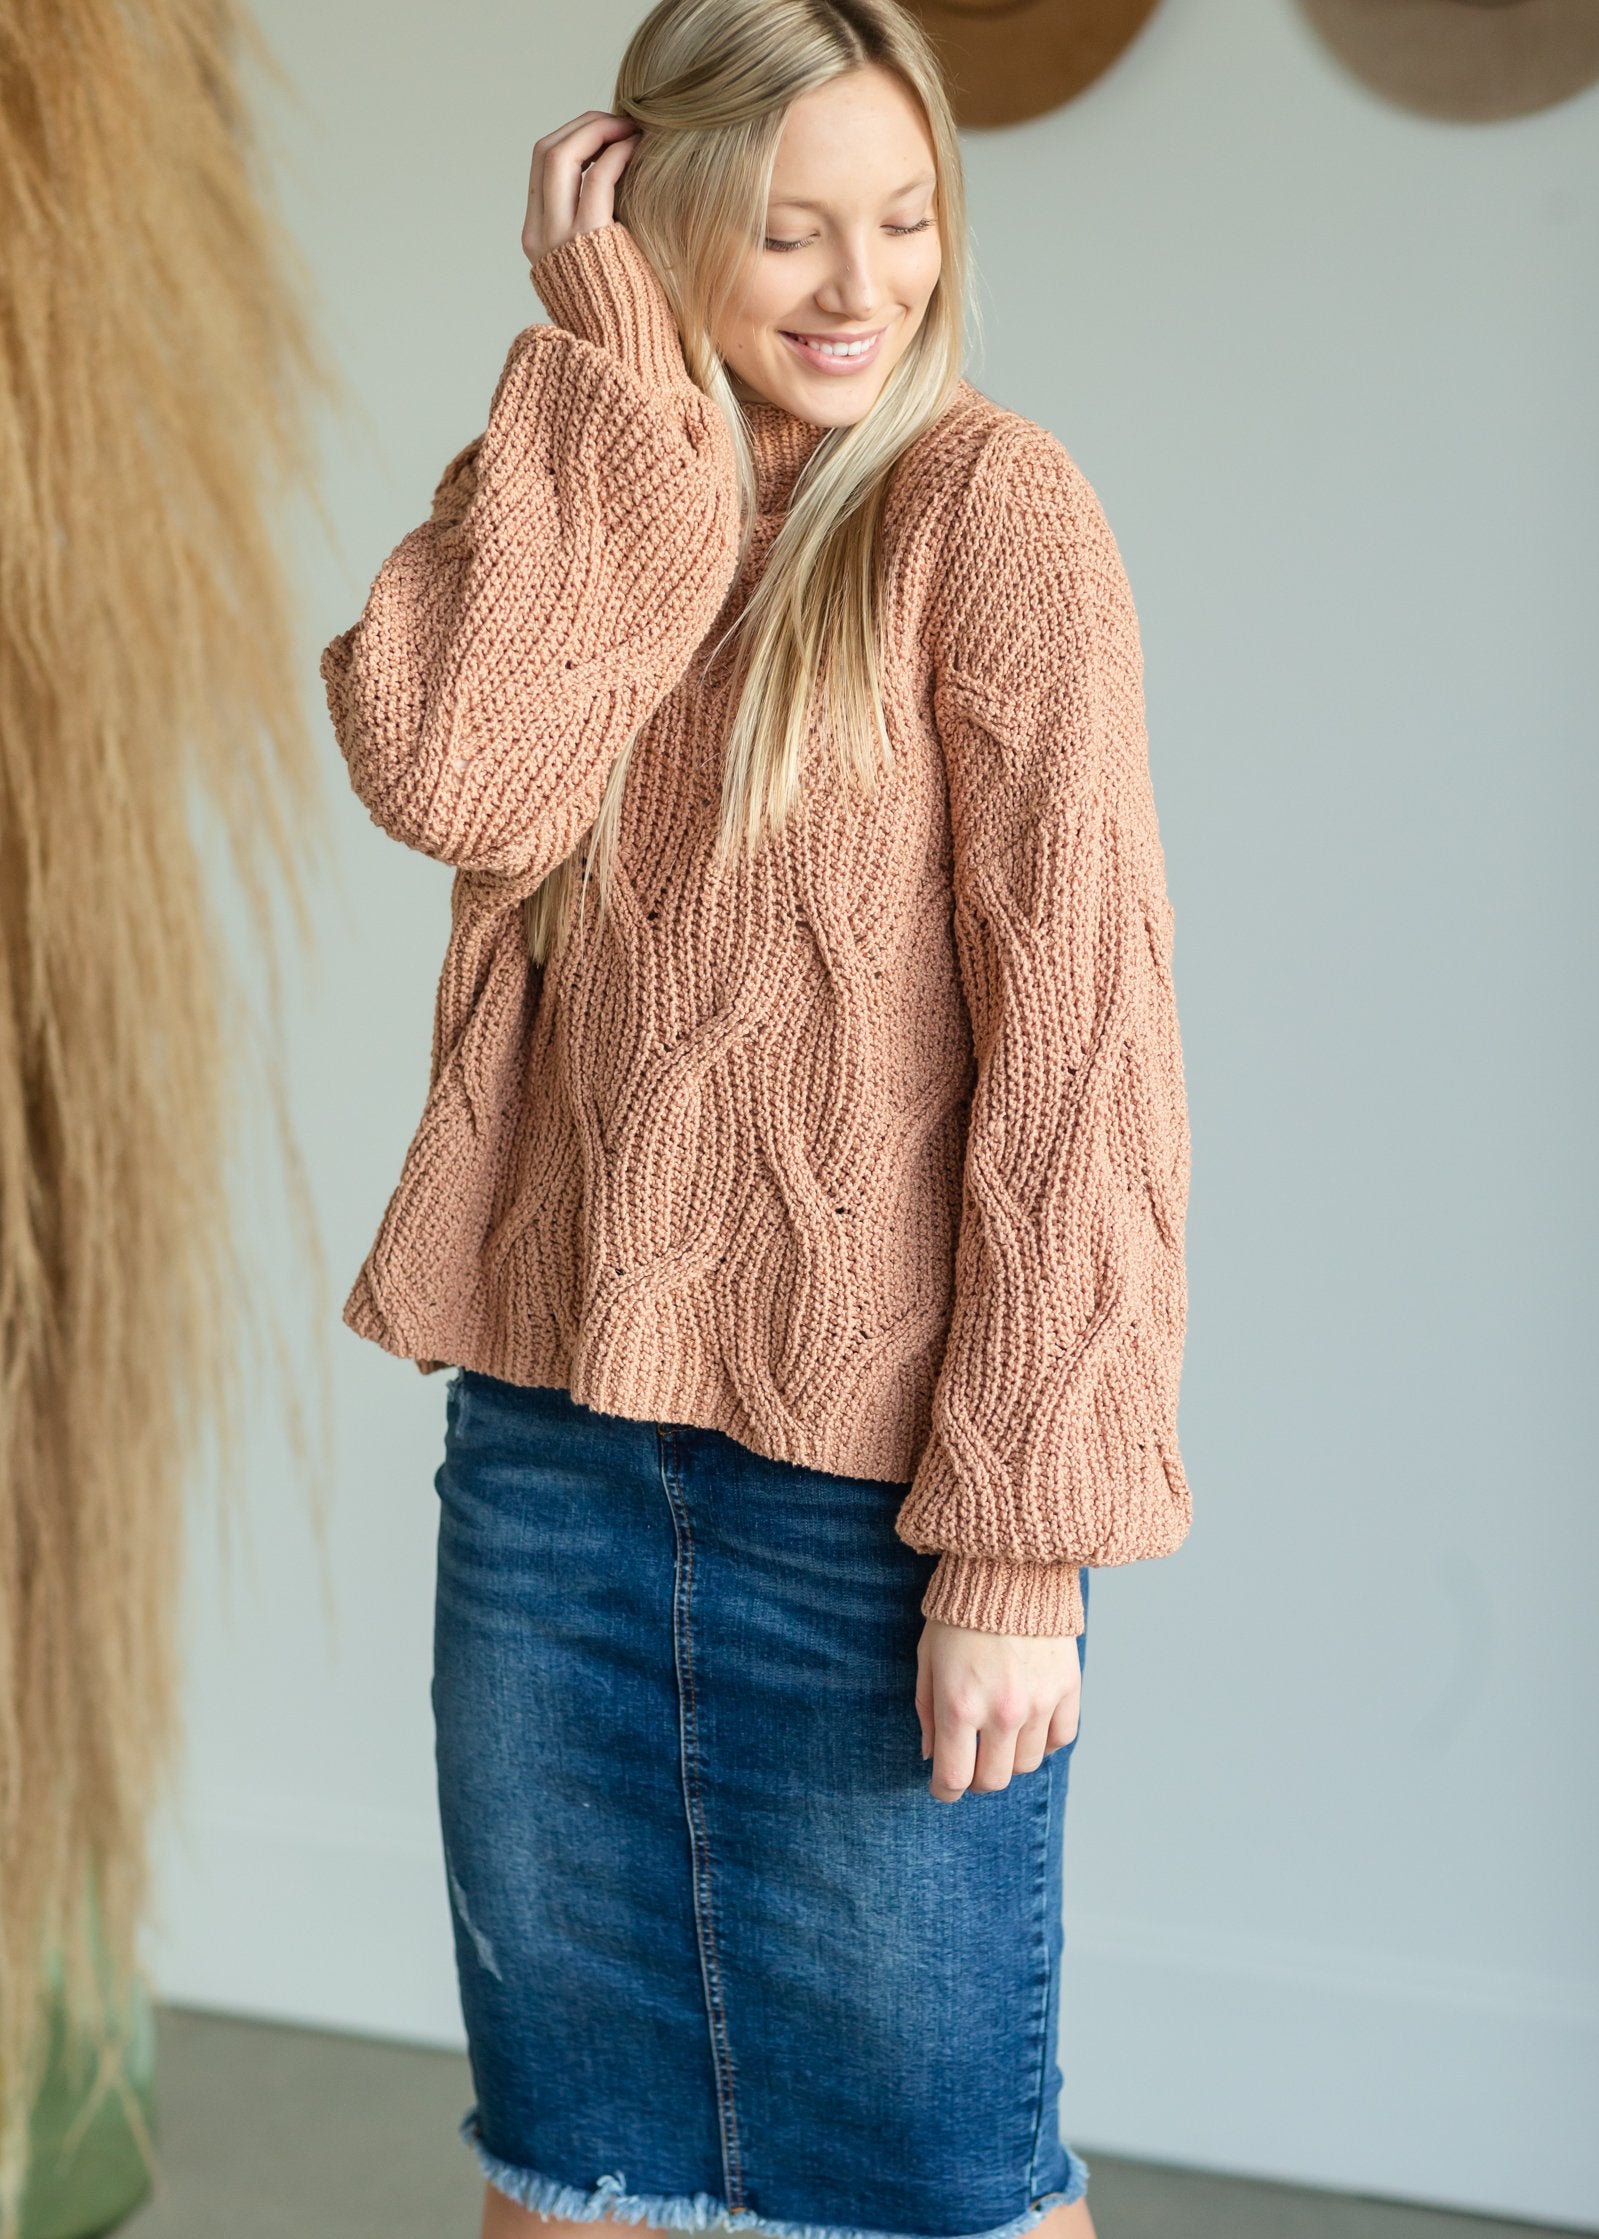 Blush Dolman Sleeve Mock Neck Sweater Tops By Together